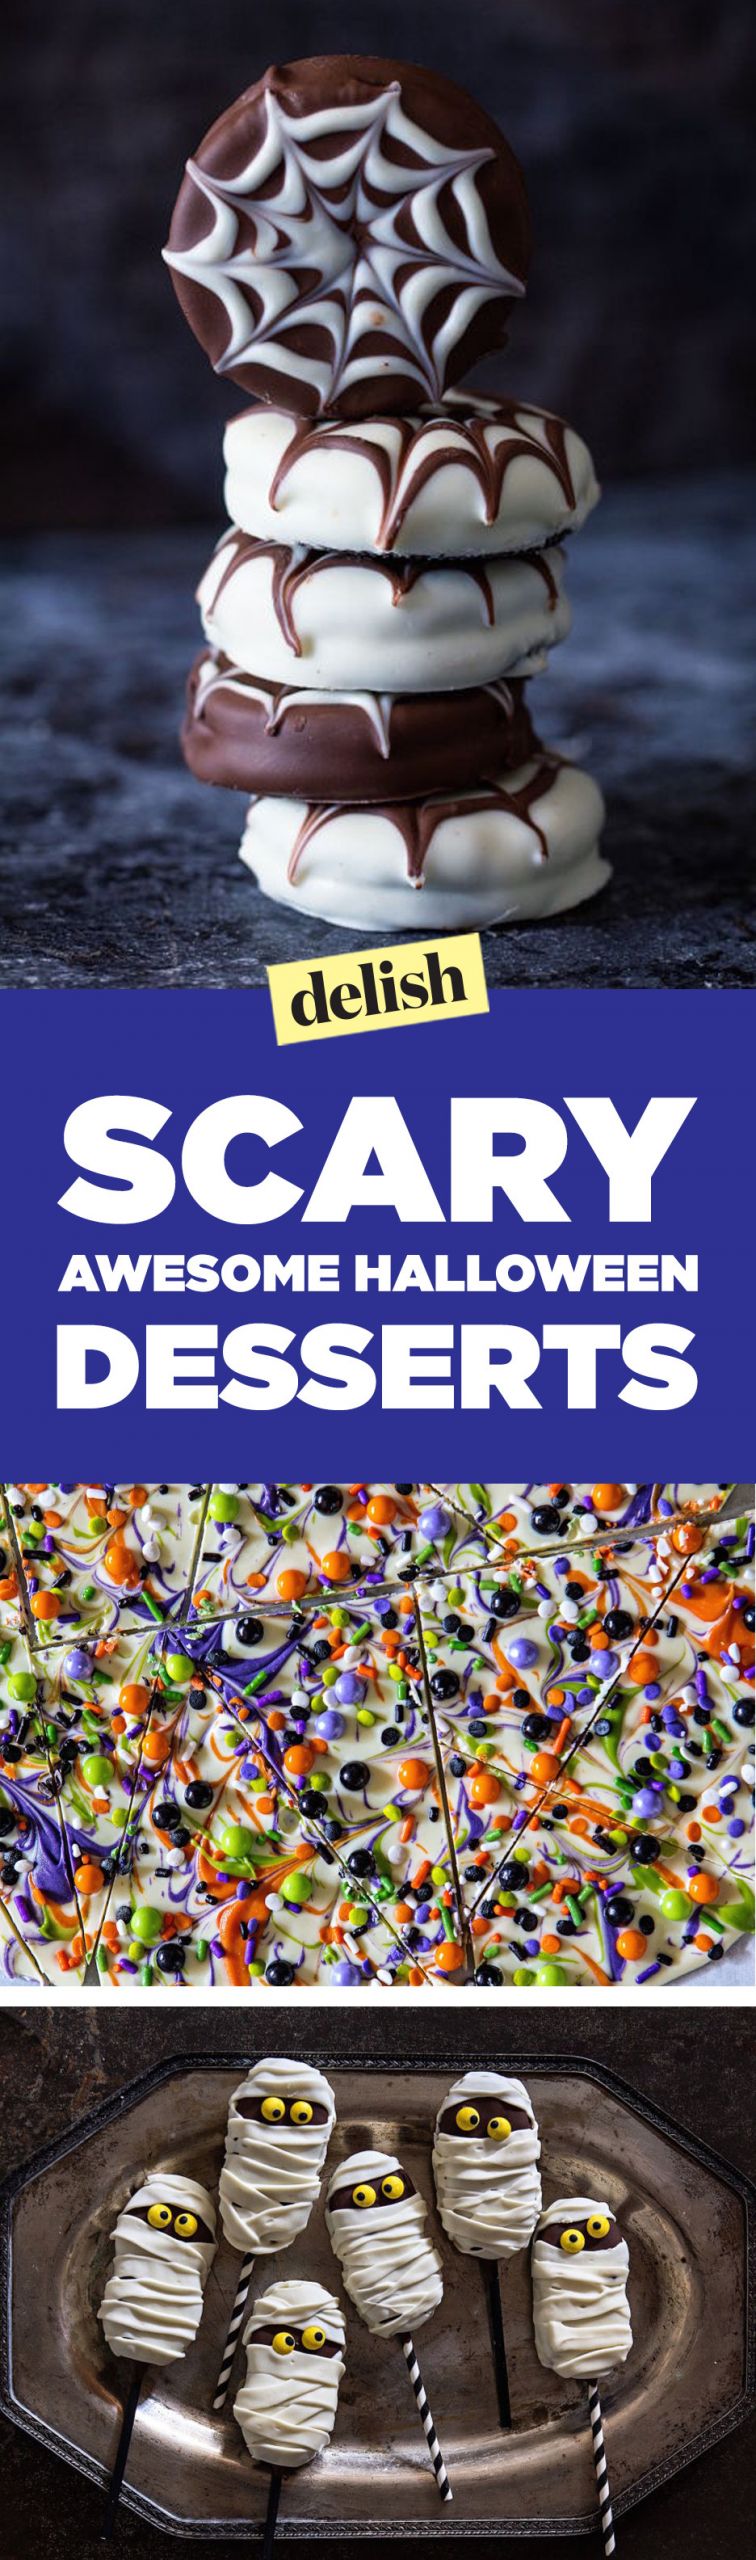 Halloween Party Desserts
 50 Easy Halloween Desserts Recipes for Halloween Party